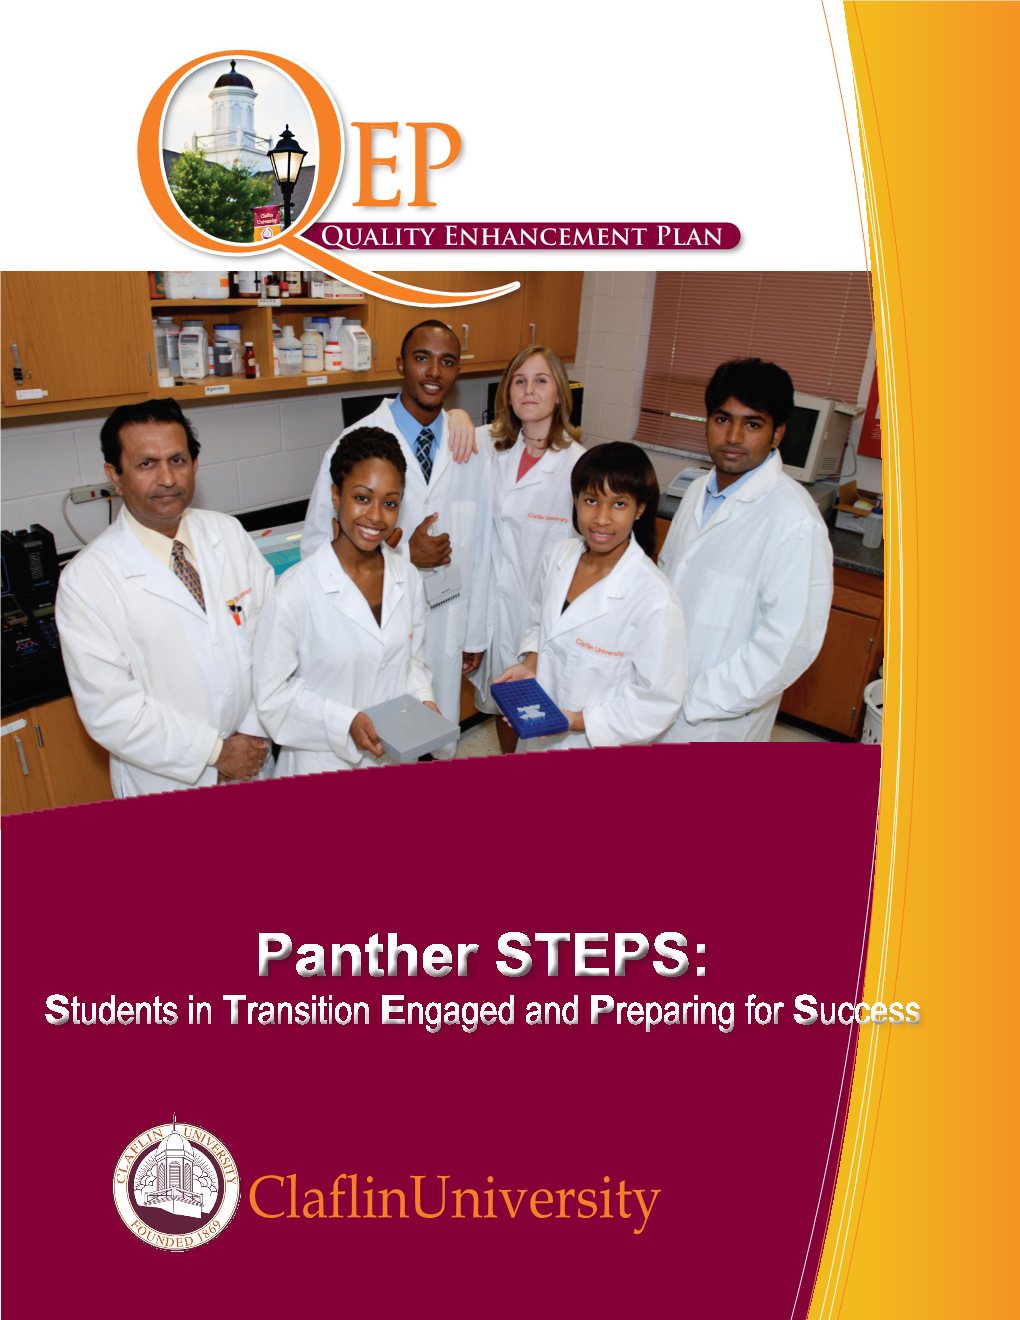 Quality Enhancement Plan: Panther STEPS